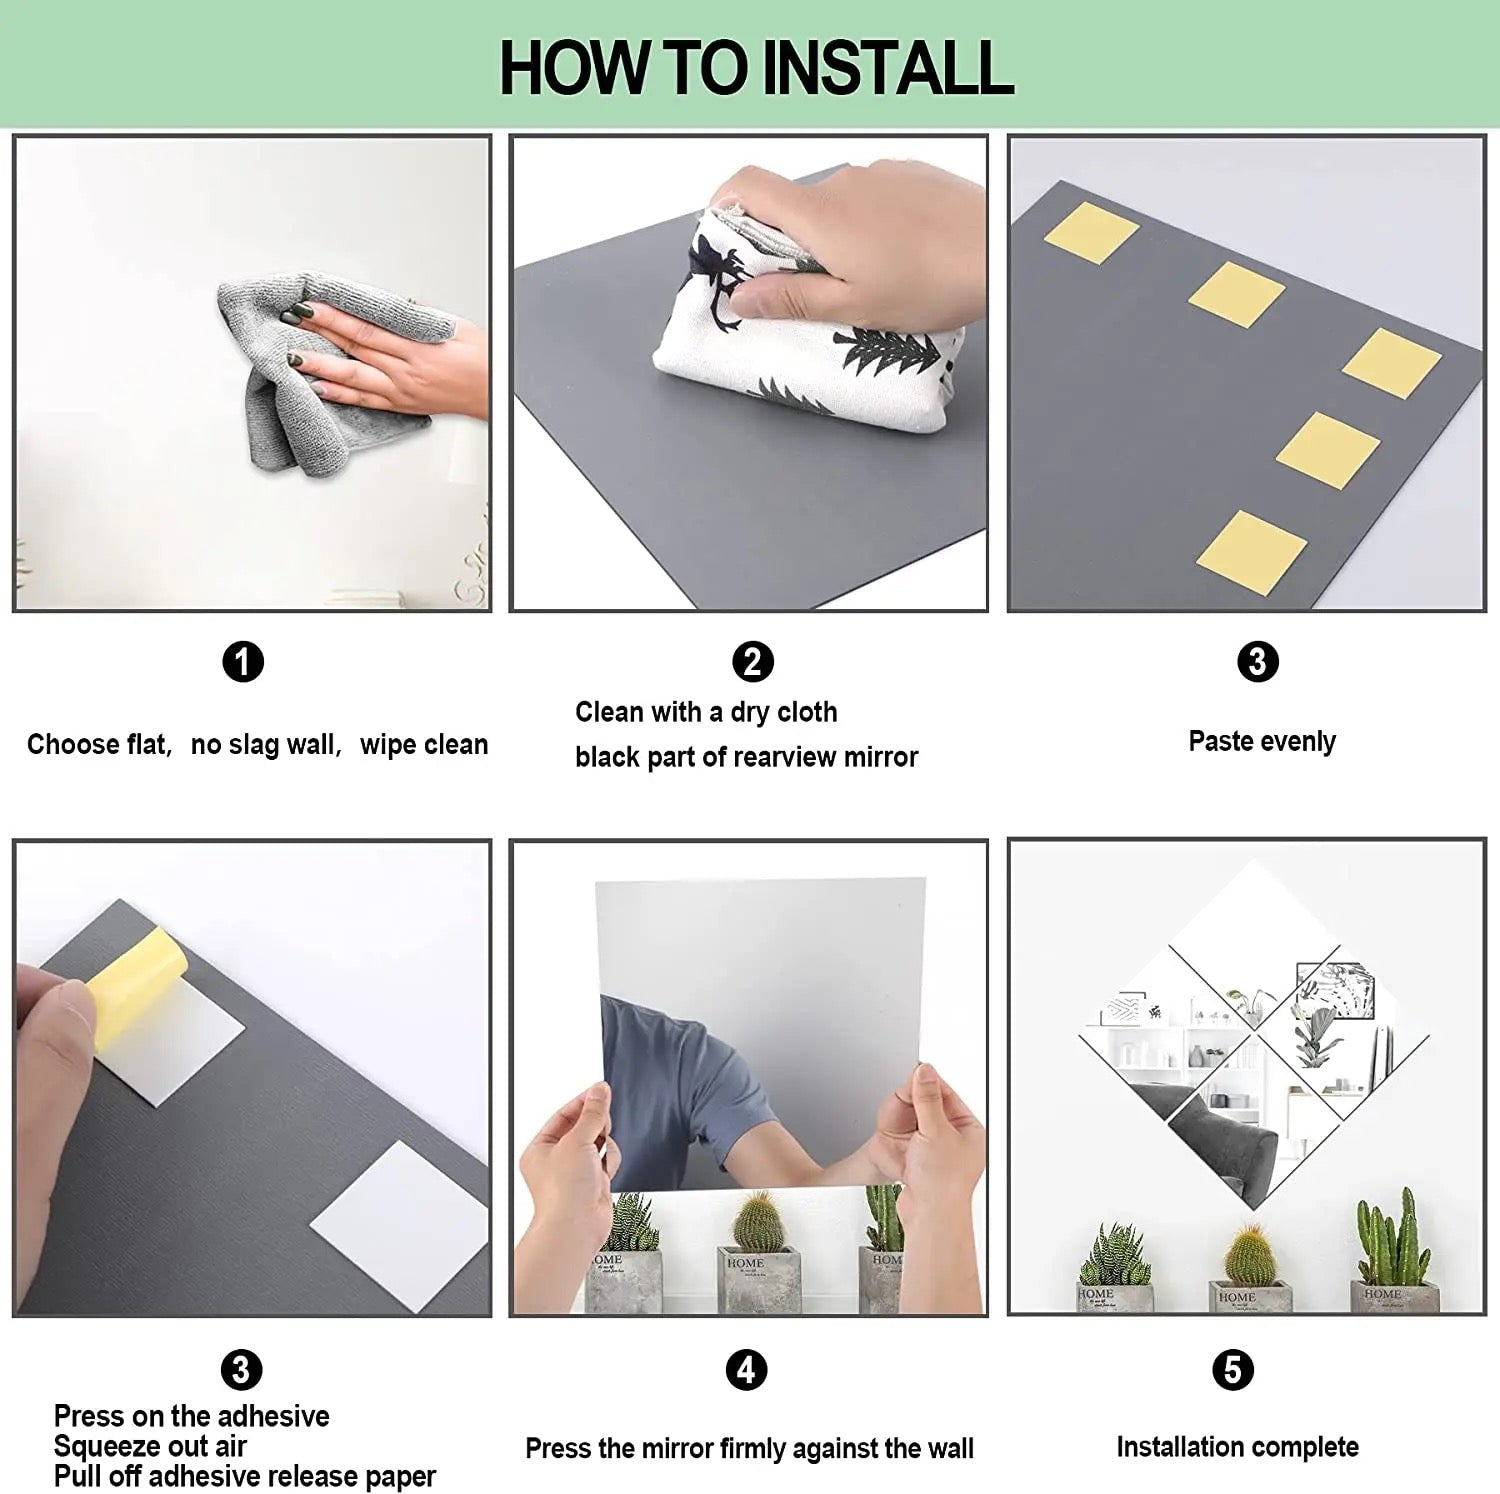 Visual instructions on how to install HD Self-Adhesive Acrylic Mirror Tiles